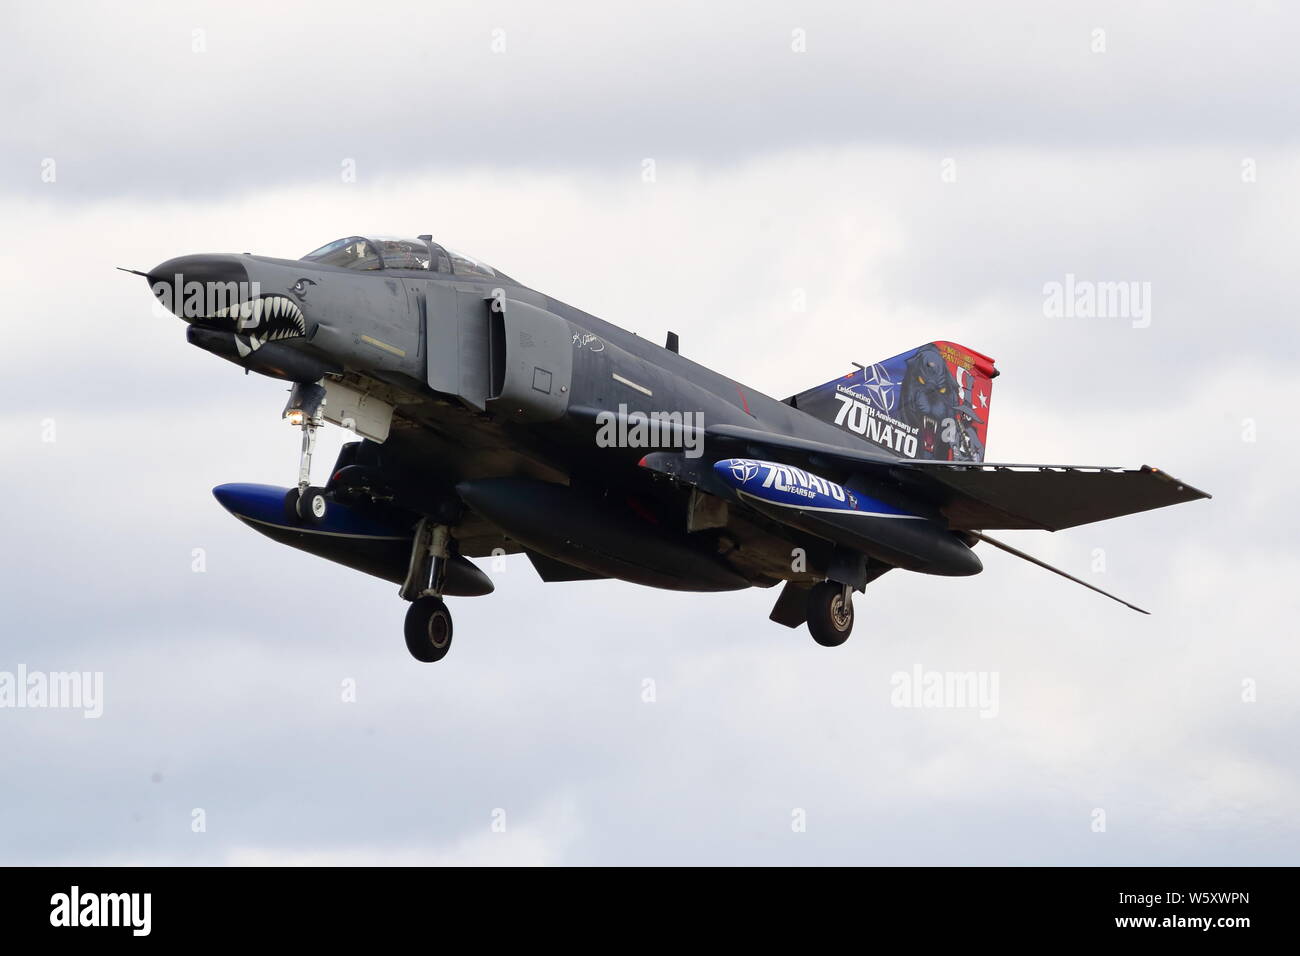 Turkish McDonnell Douglas Phantom F-4 with livery celebrating 70 years of Nato landing at RIAT 2019 at RAF Fairford, Gloucestershire, UK Stock Photo